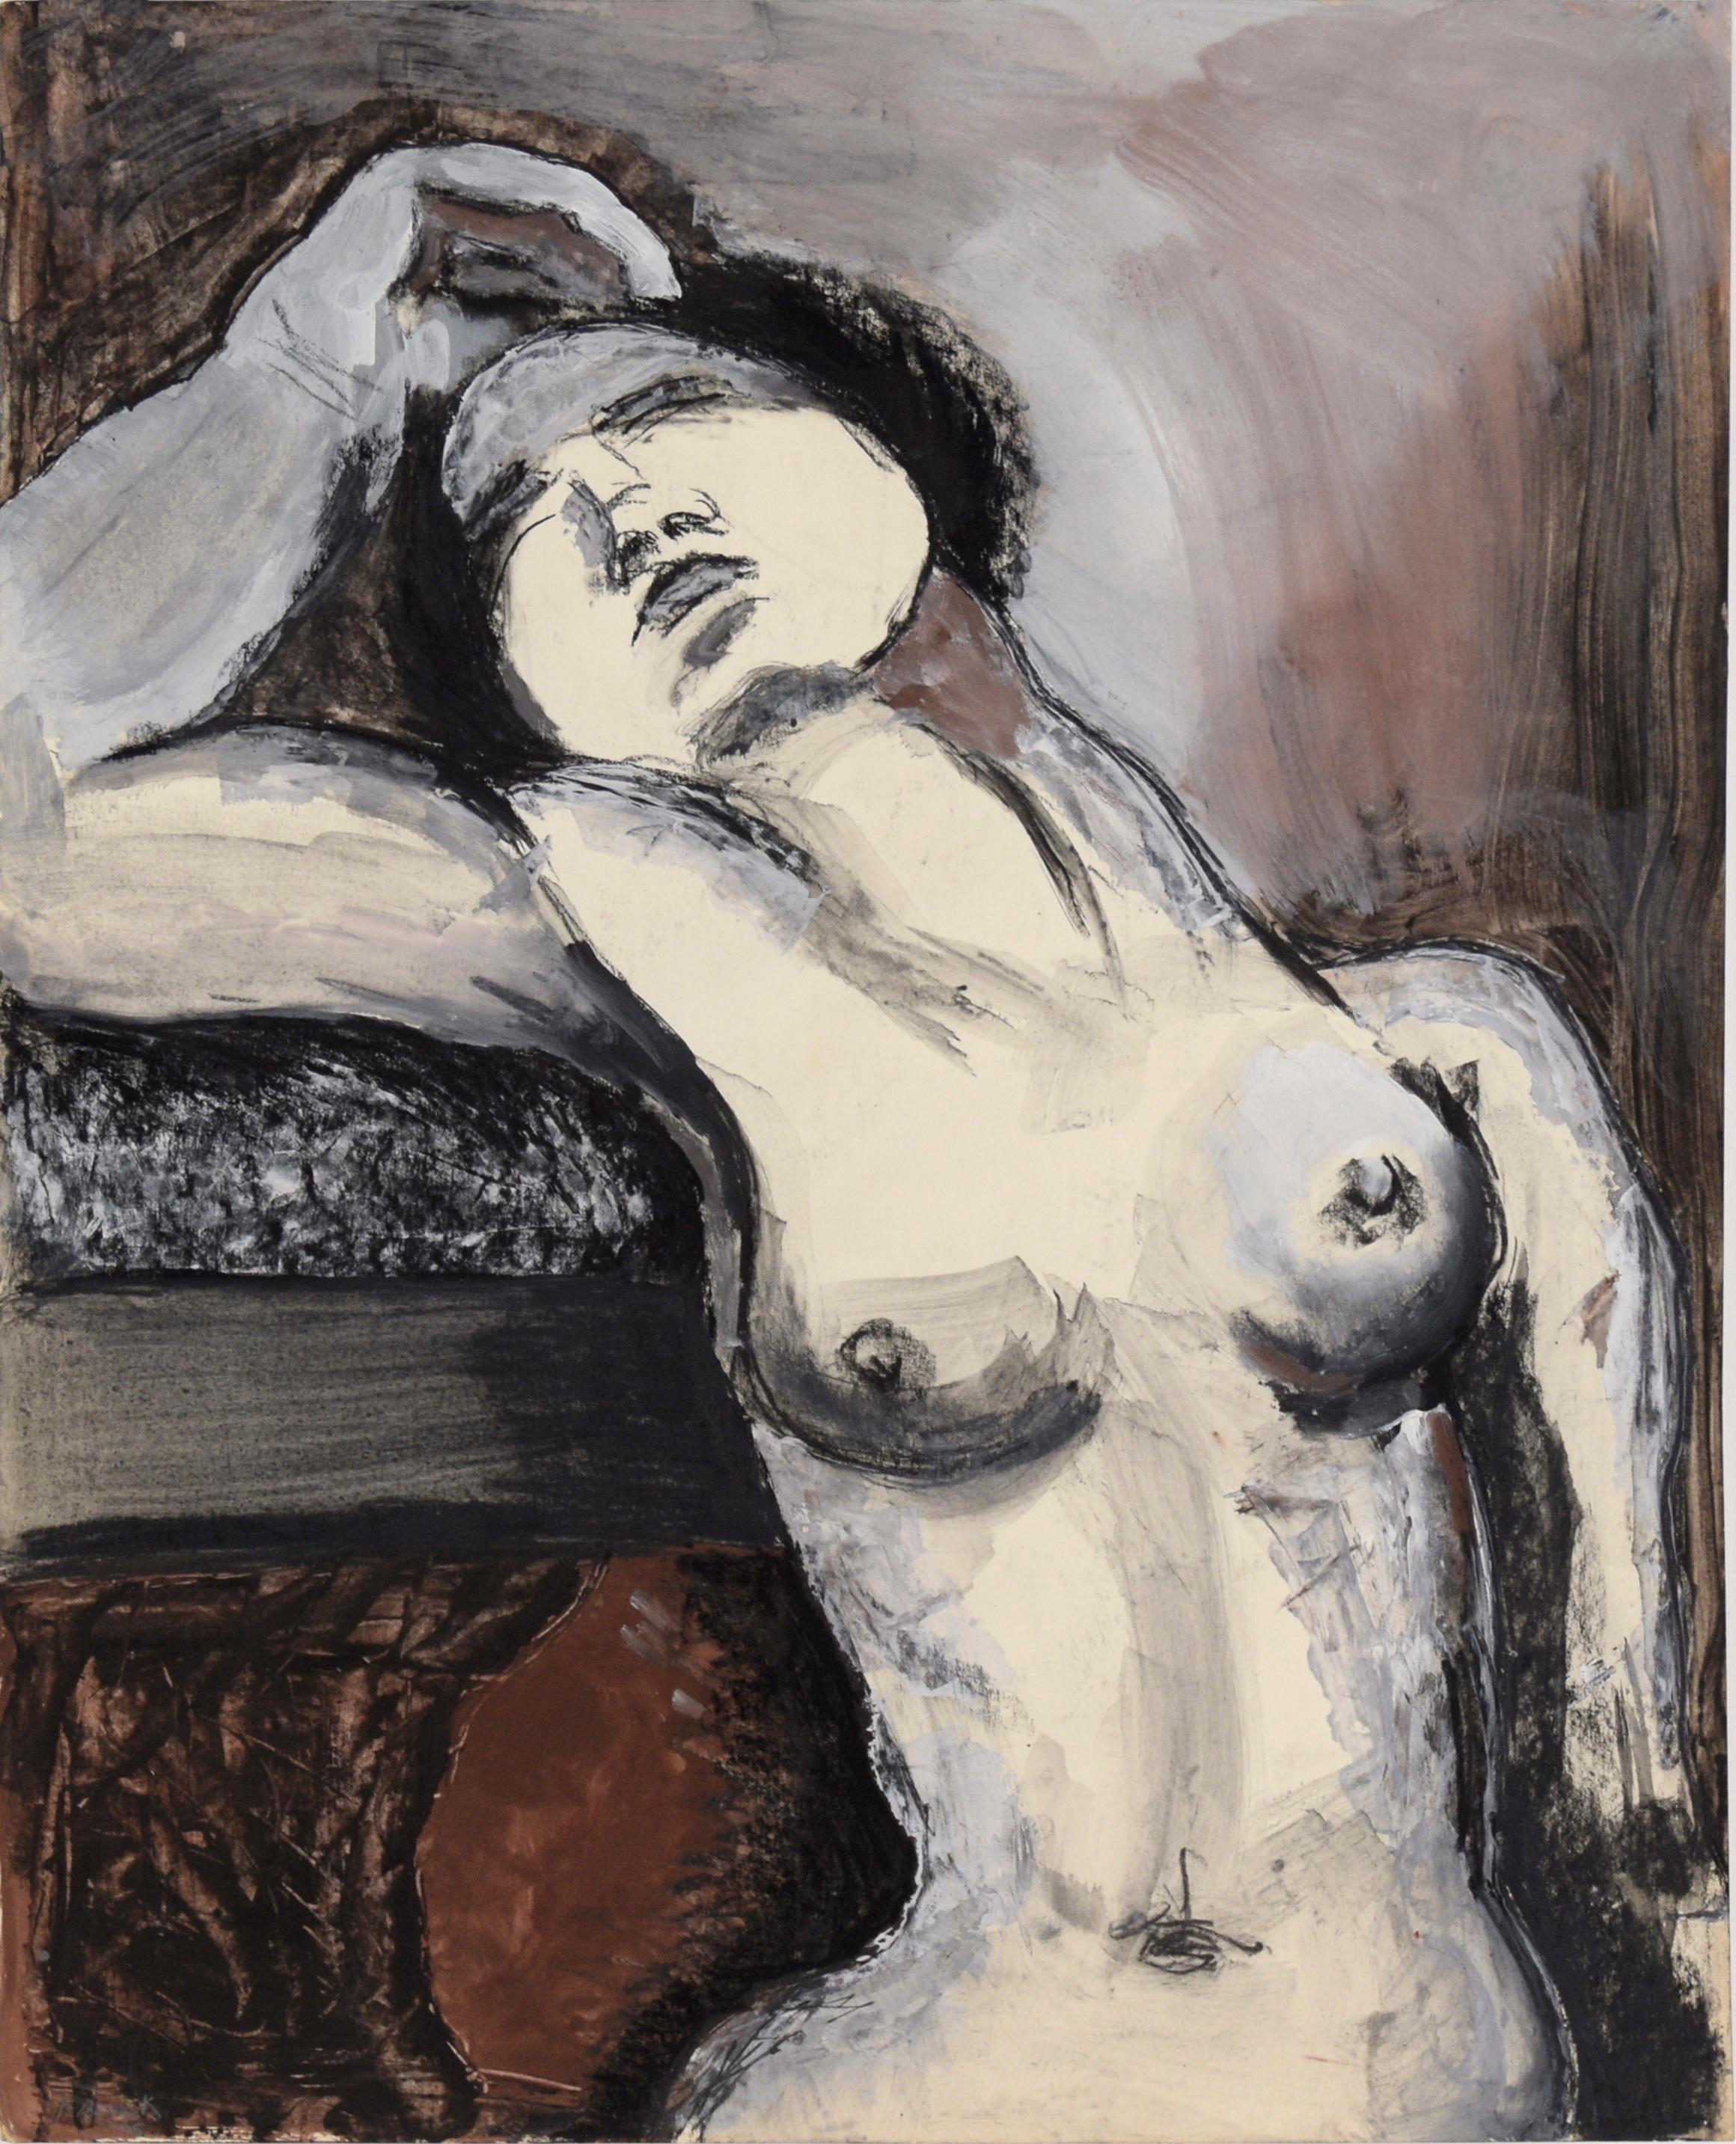 Black and White Nude Woman in Acrylic, Gouache, and Charcoal on Paper